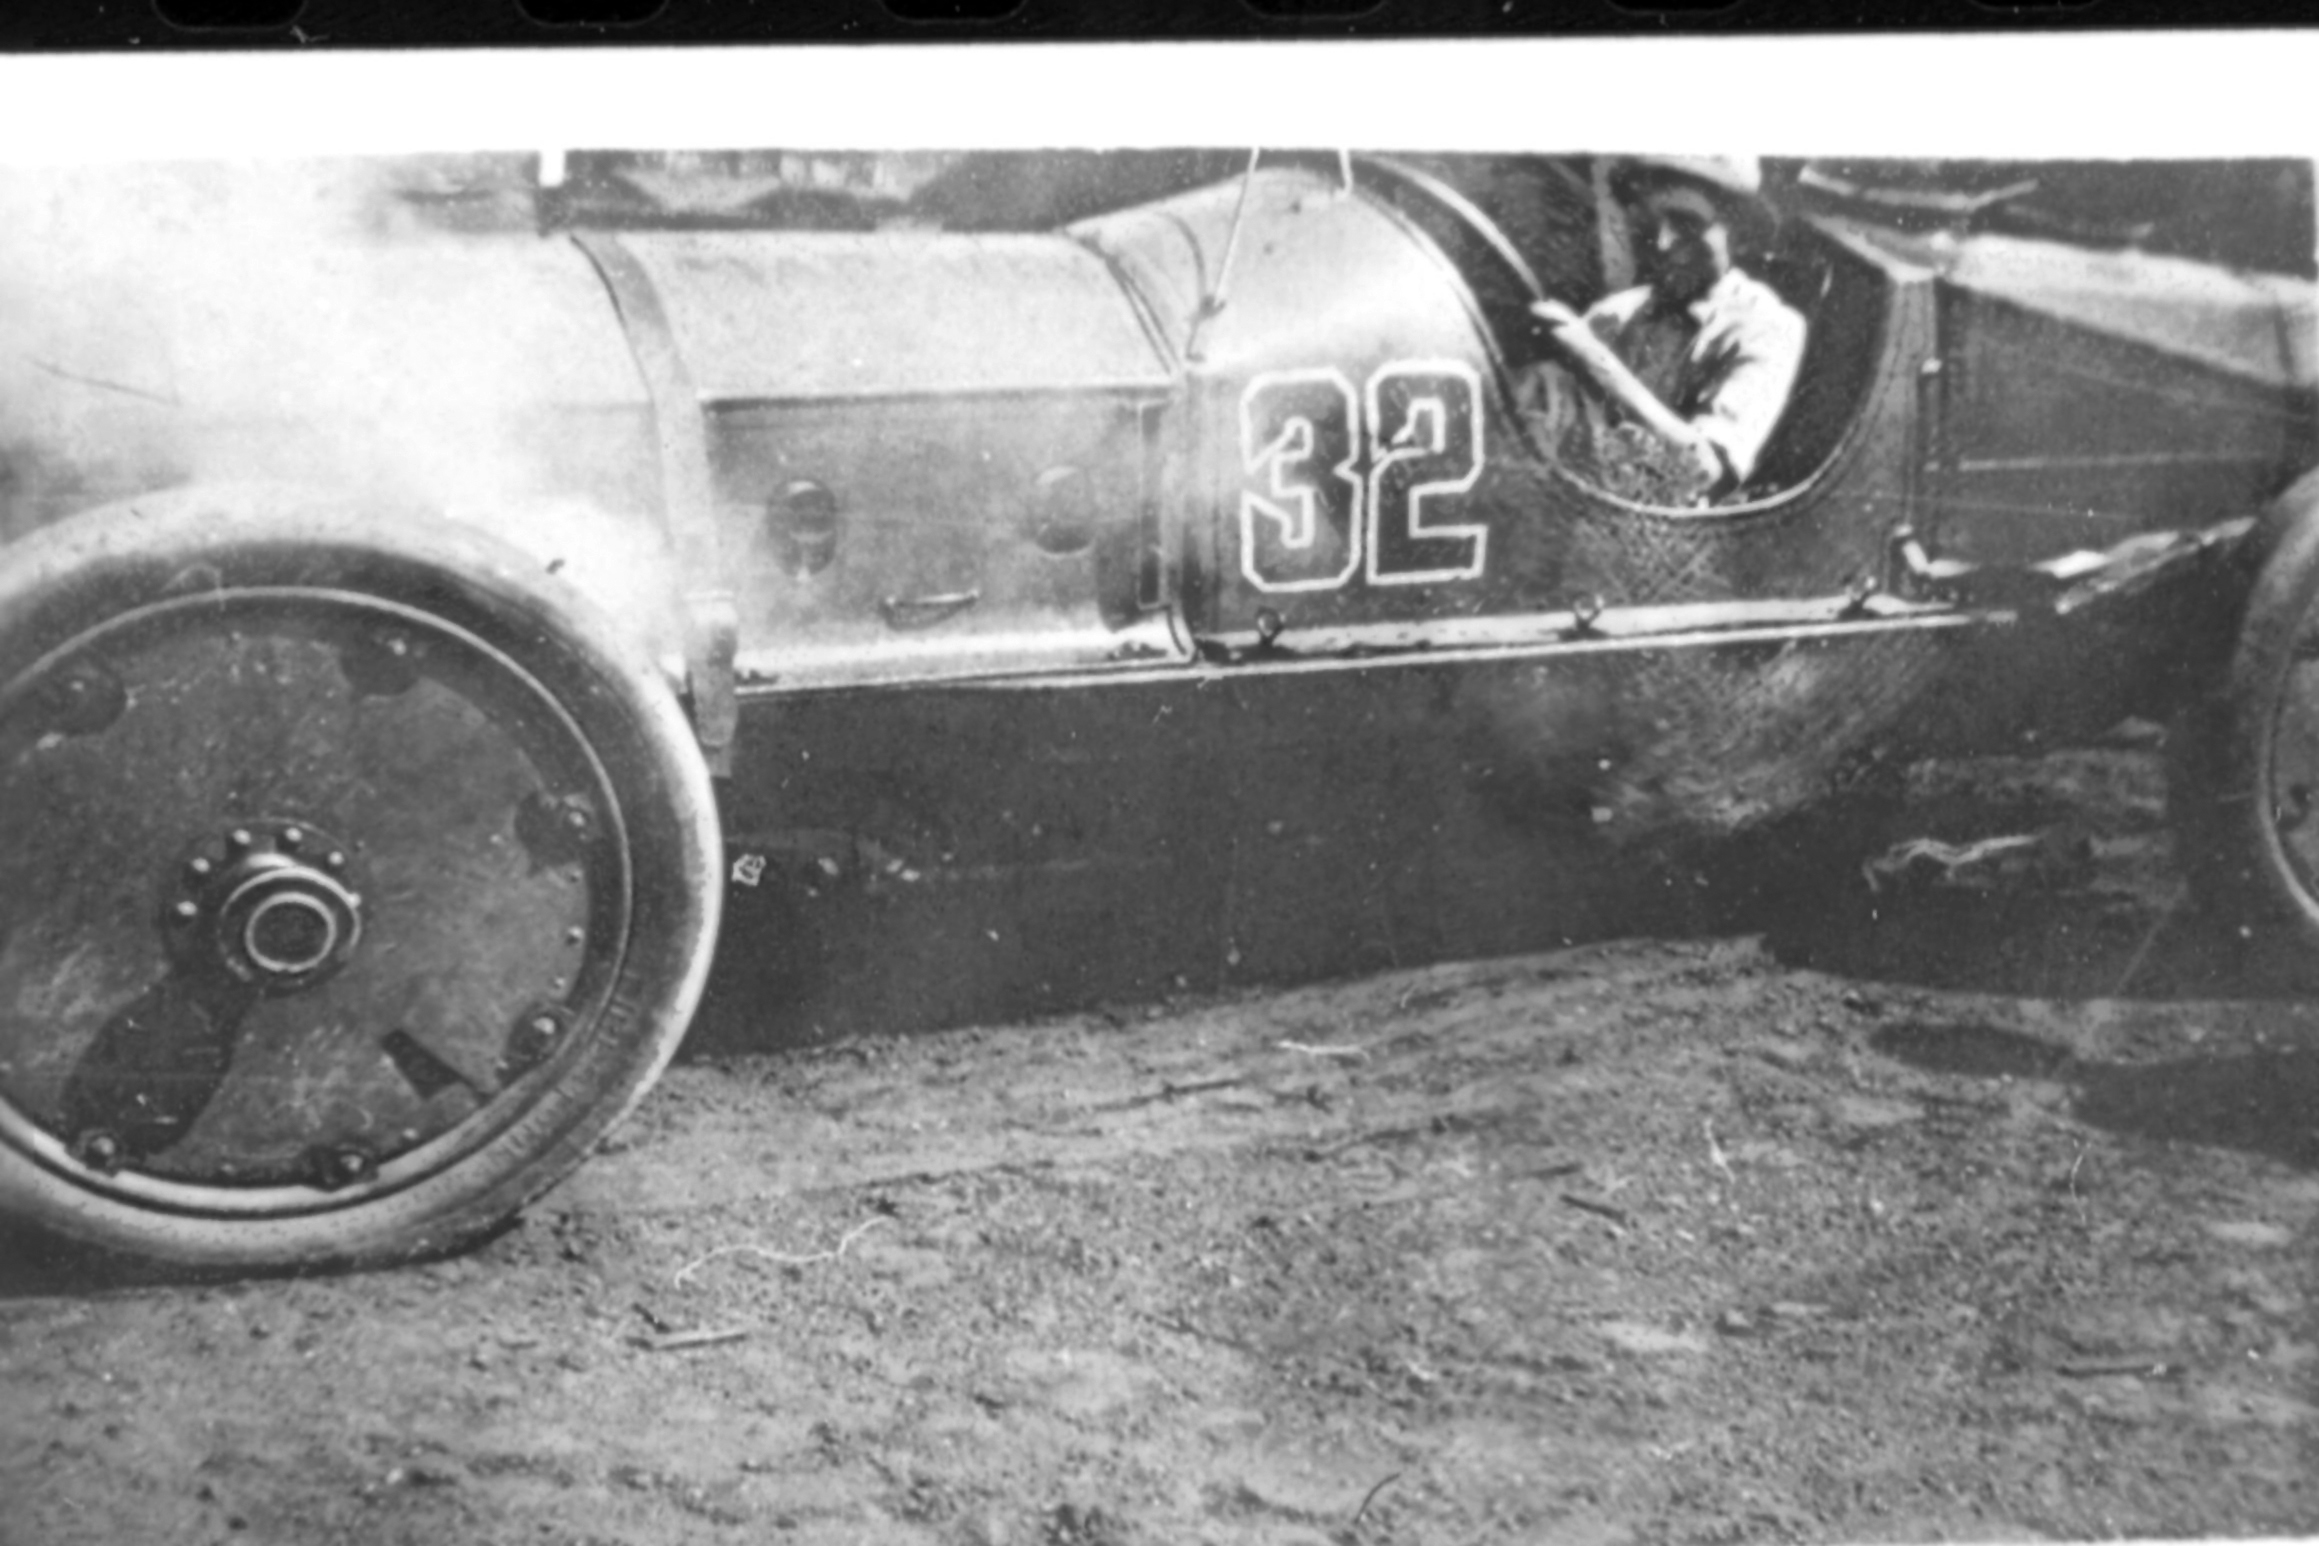 Clessie Cummins in the Marmon “Wasp” that Ray Harroun drove to victory in the first Indianapolis 500 mile race. Clessie, who worked for Nordyke & Marmon, was in the race pit crew.